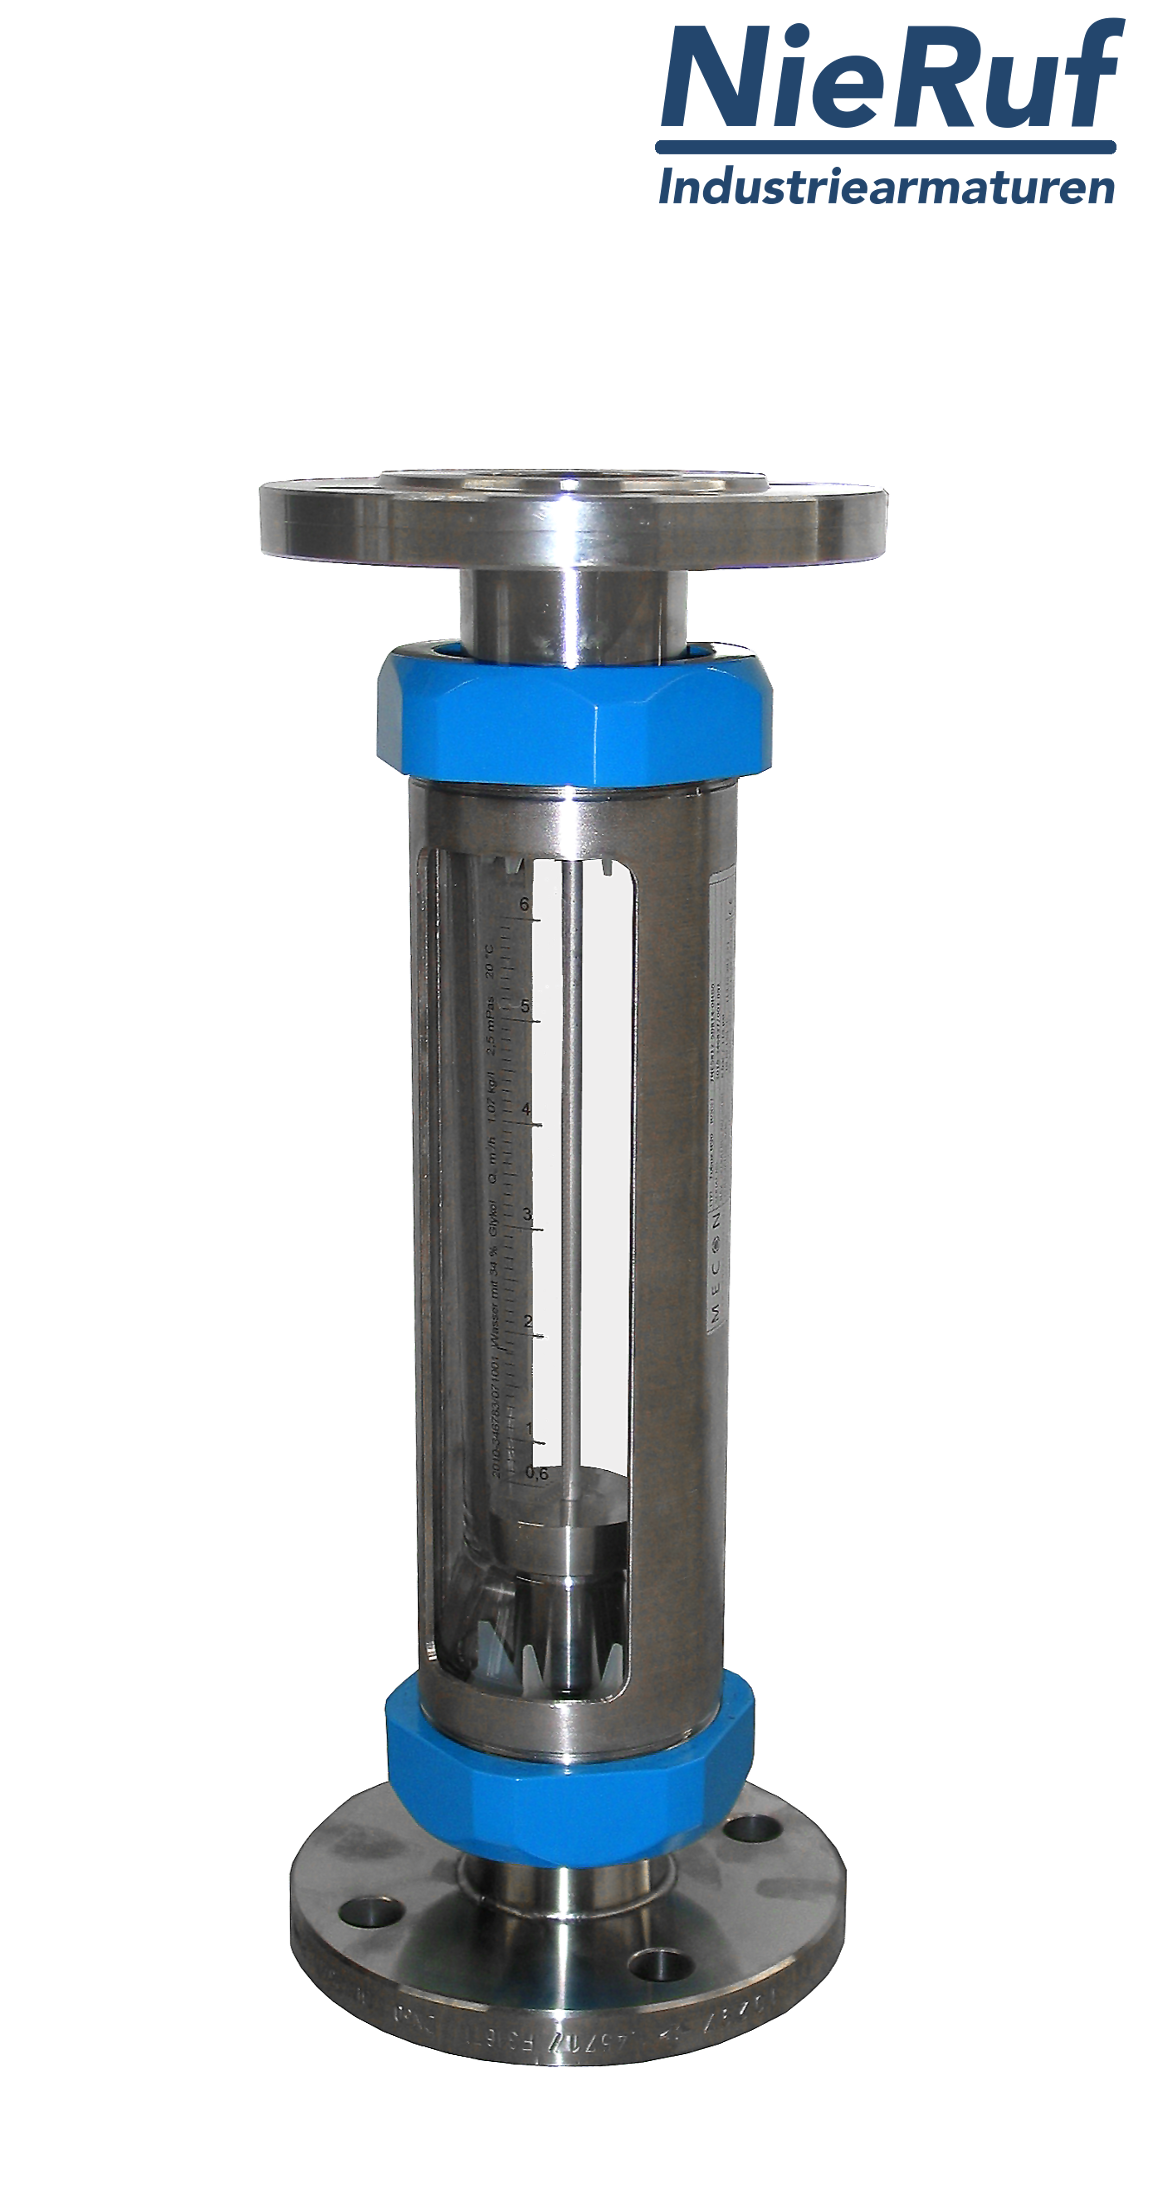 Variable area flowmeter stainless steel + borosilicate flange DN50 300.0 - 3000 l/h water FKM